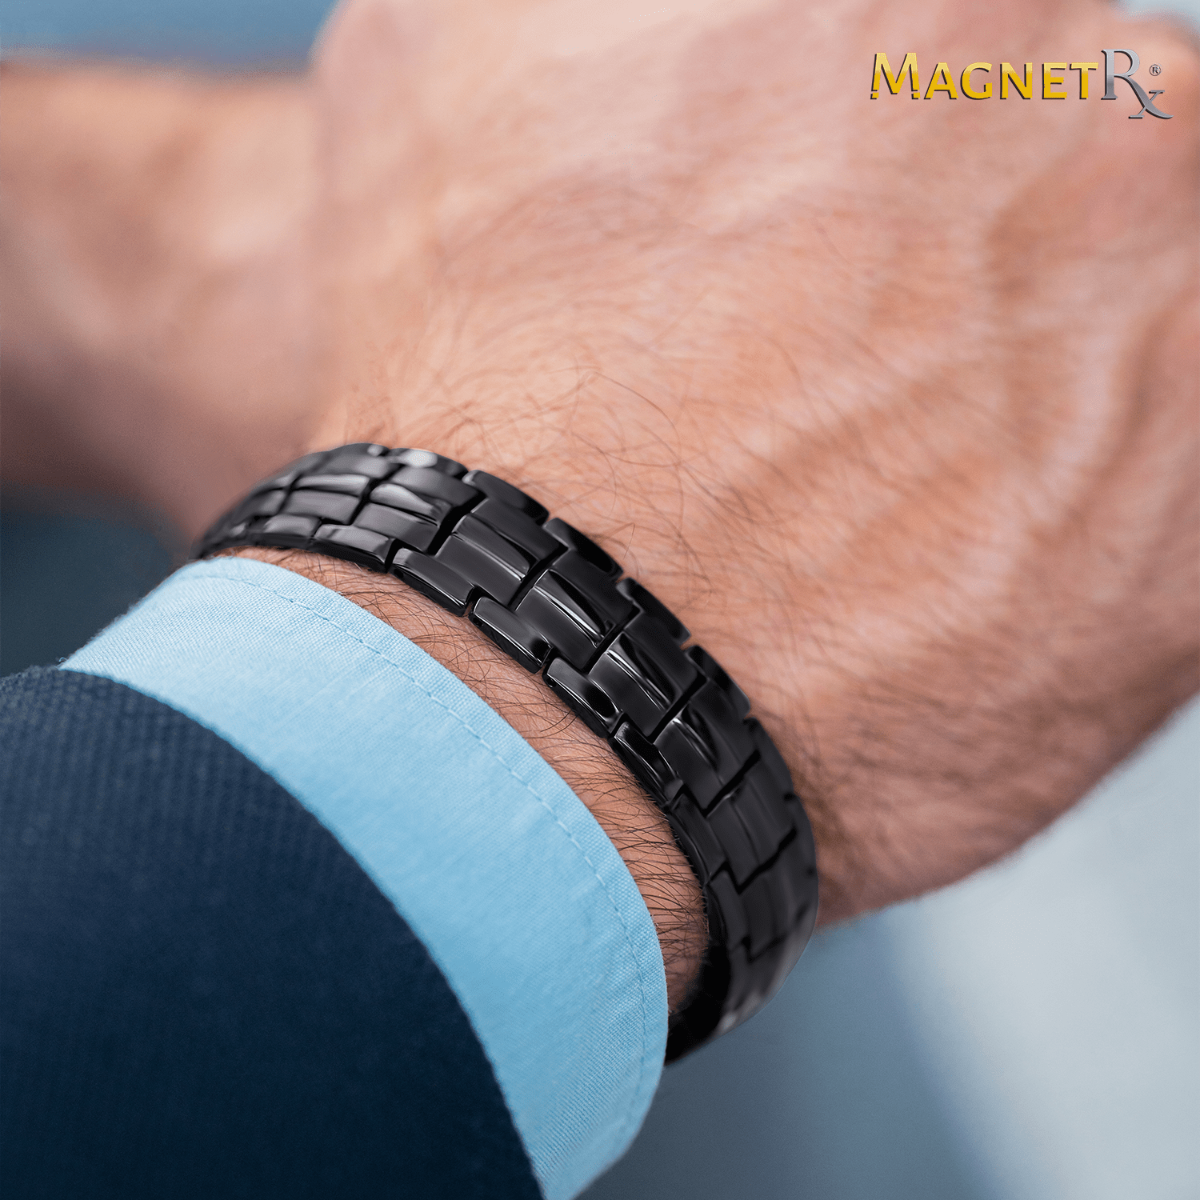 MagnetRX Ultra Strength Sports Magnetic Bracelet - Waterproof Silicone Bracelet for Pain Relief, Circulation, Energy & Balance - Wide Magnetic